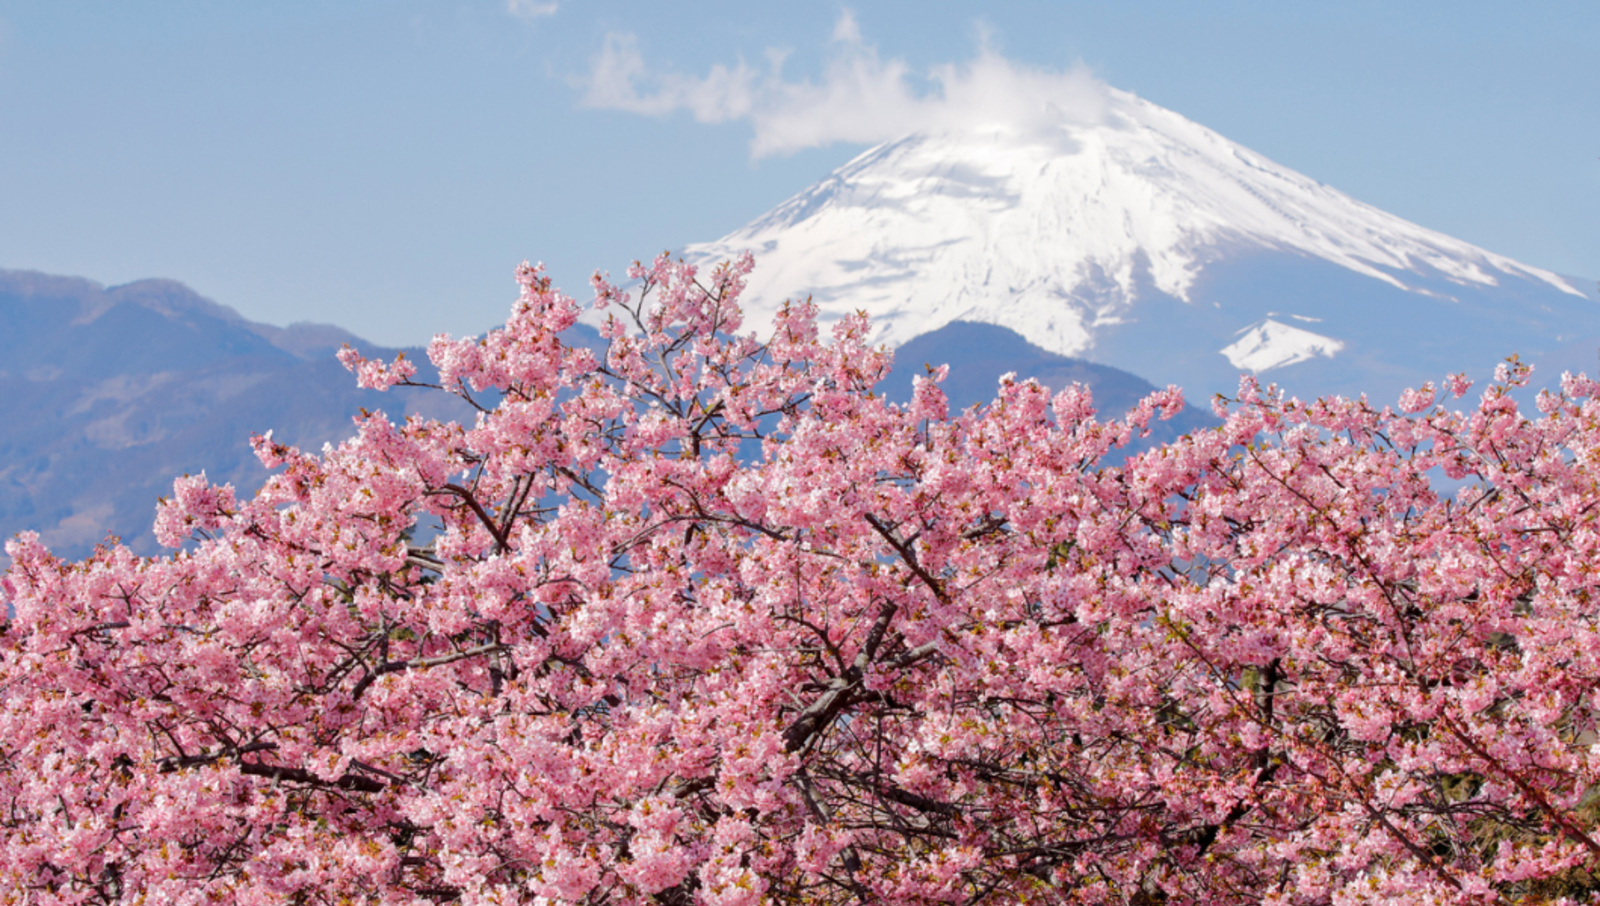 bright pink cherry blossoms in front of mountain covered in snow